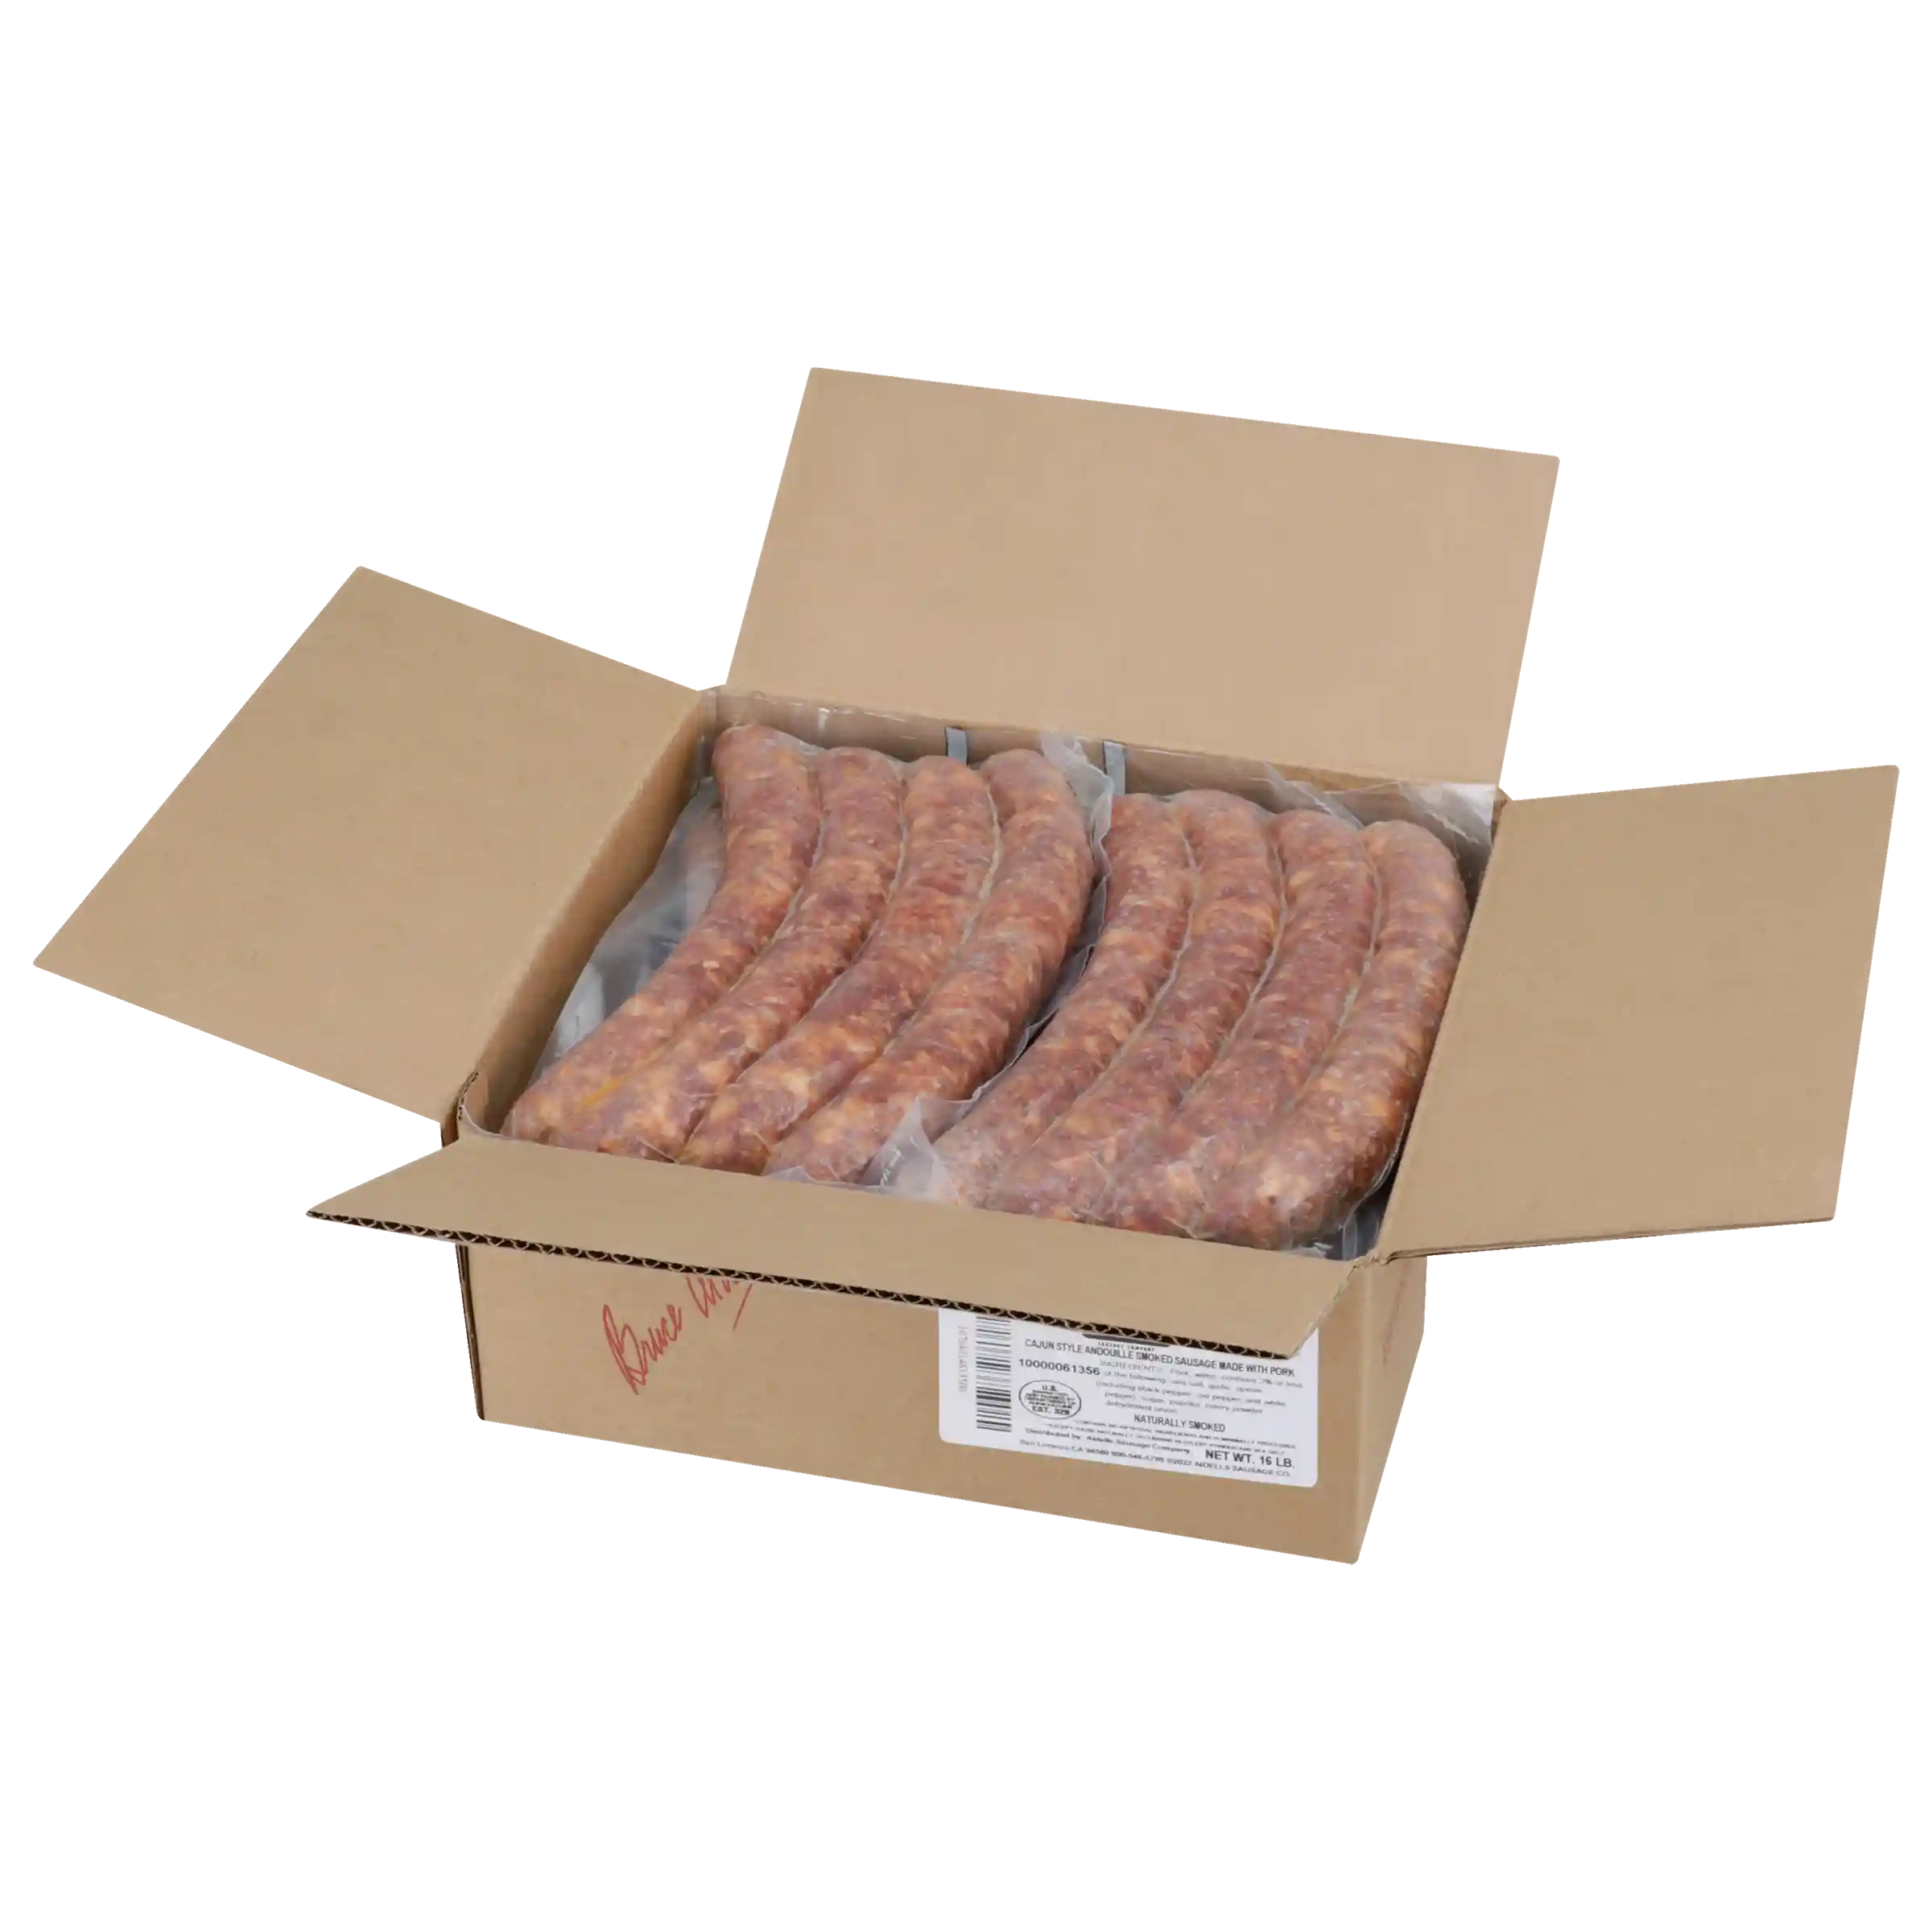 Aidells® Fully Cooked Smoked Cajun-Style Andouille Pork Sausage, 2 oz, 128 Links per Case, 16 Lbs, Frozen_image_31